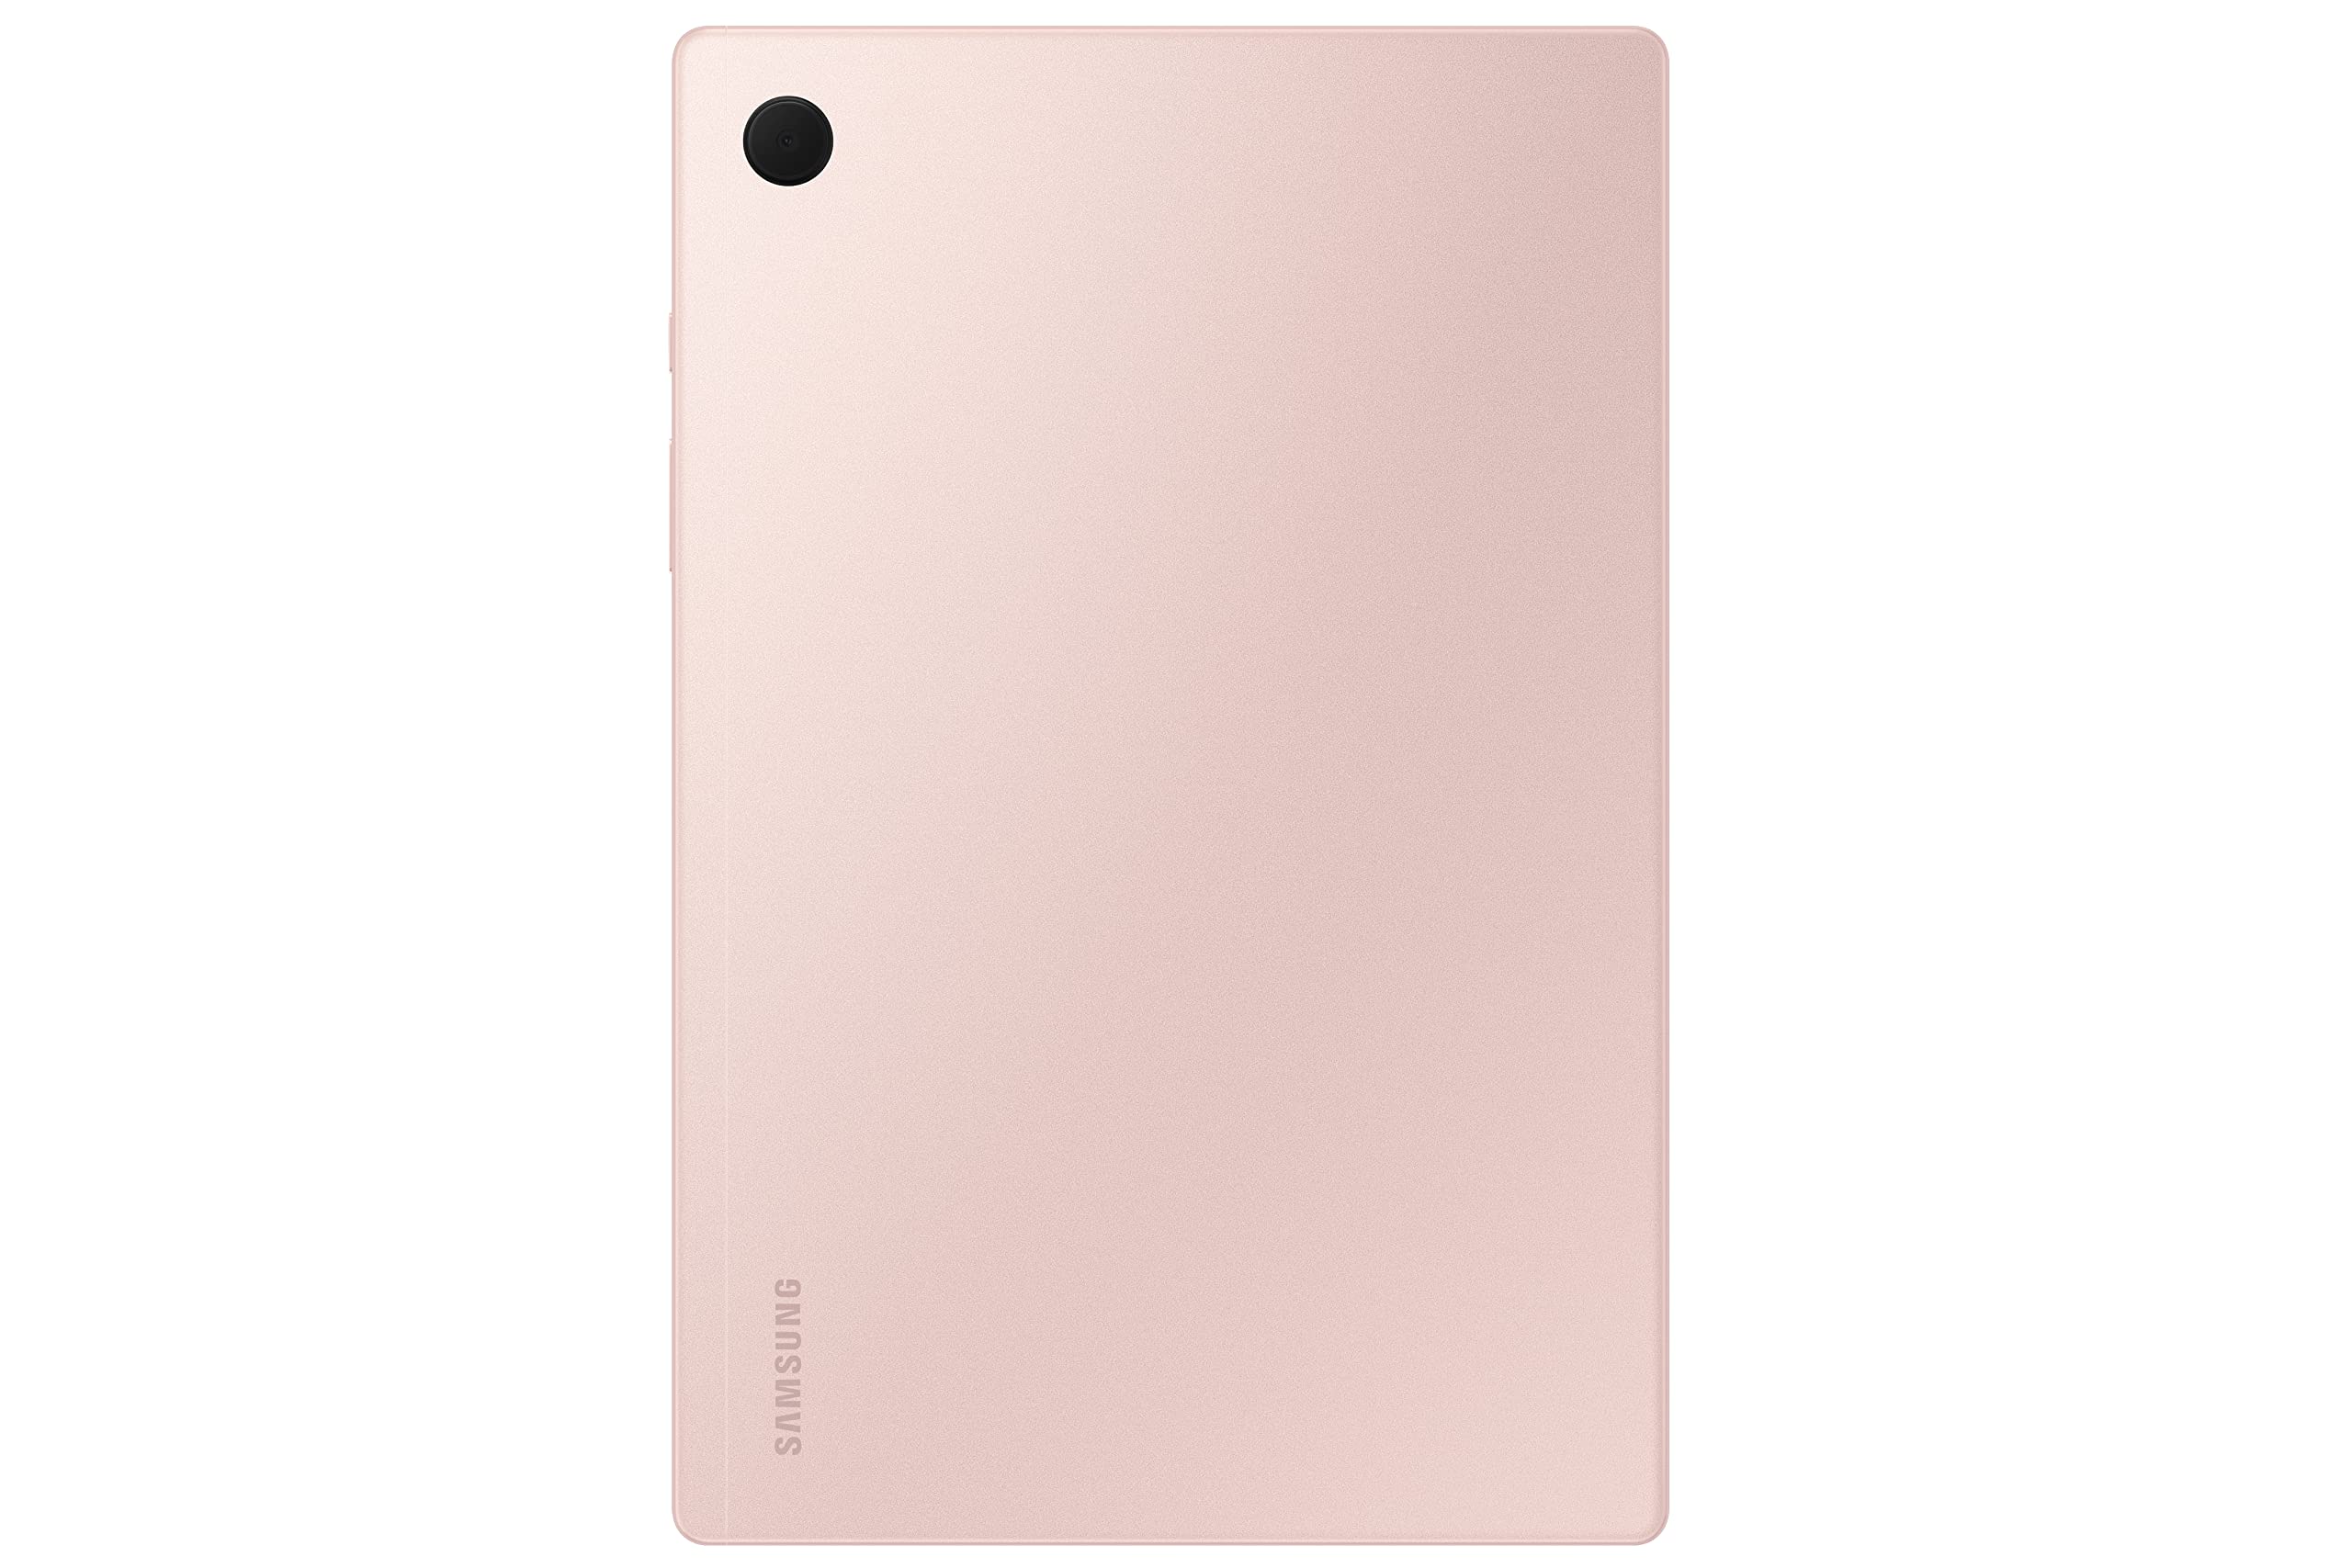 SAMSUNG Galaxy Tab A8 10.5” 64GB Android Tablet, LCD Screen, Kids Content, Smart Switch, Expandable Memory, Long Lasting Battery, US Version, 2022, Pink Gold